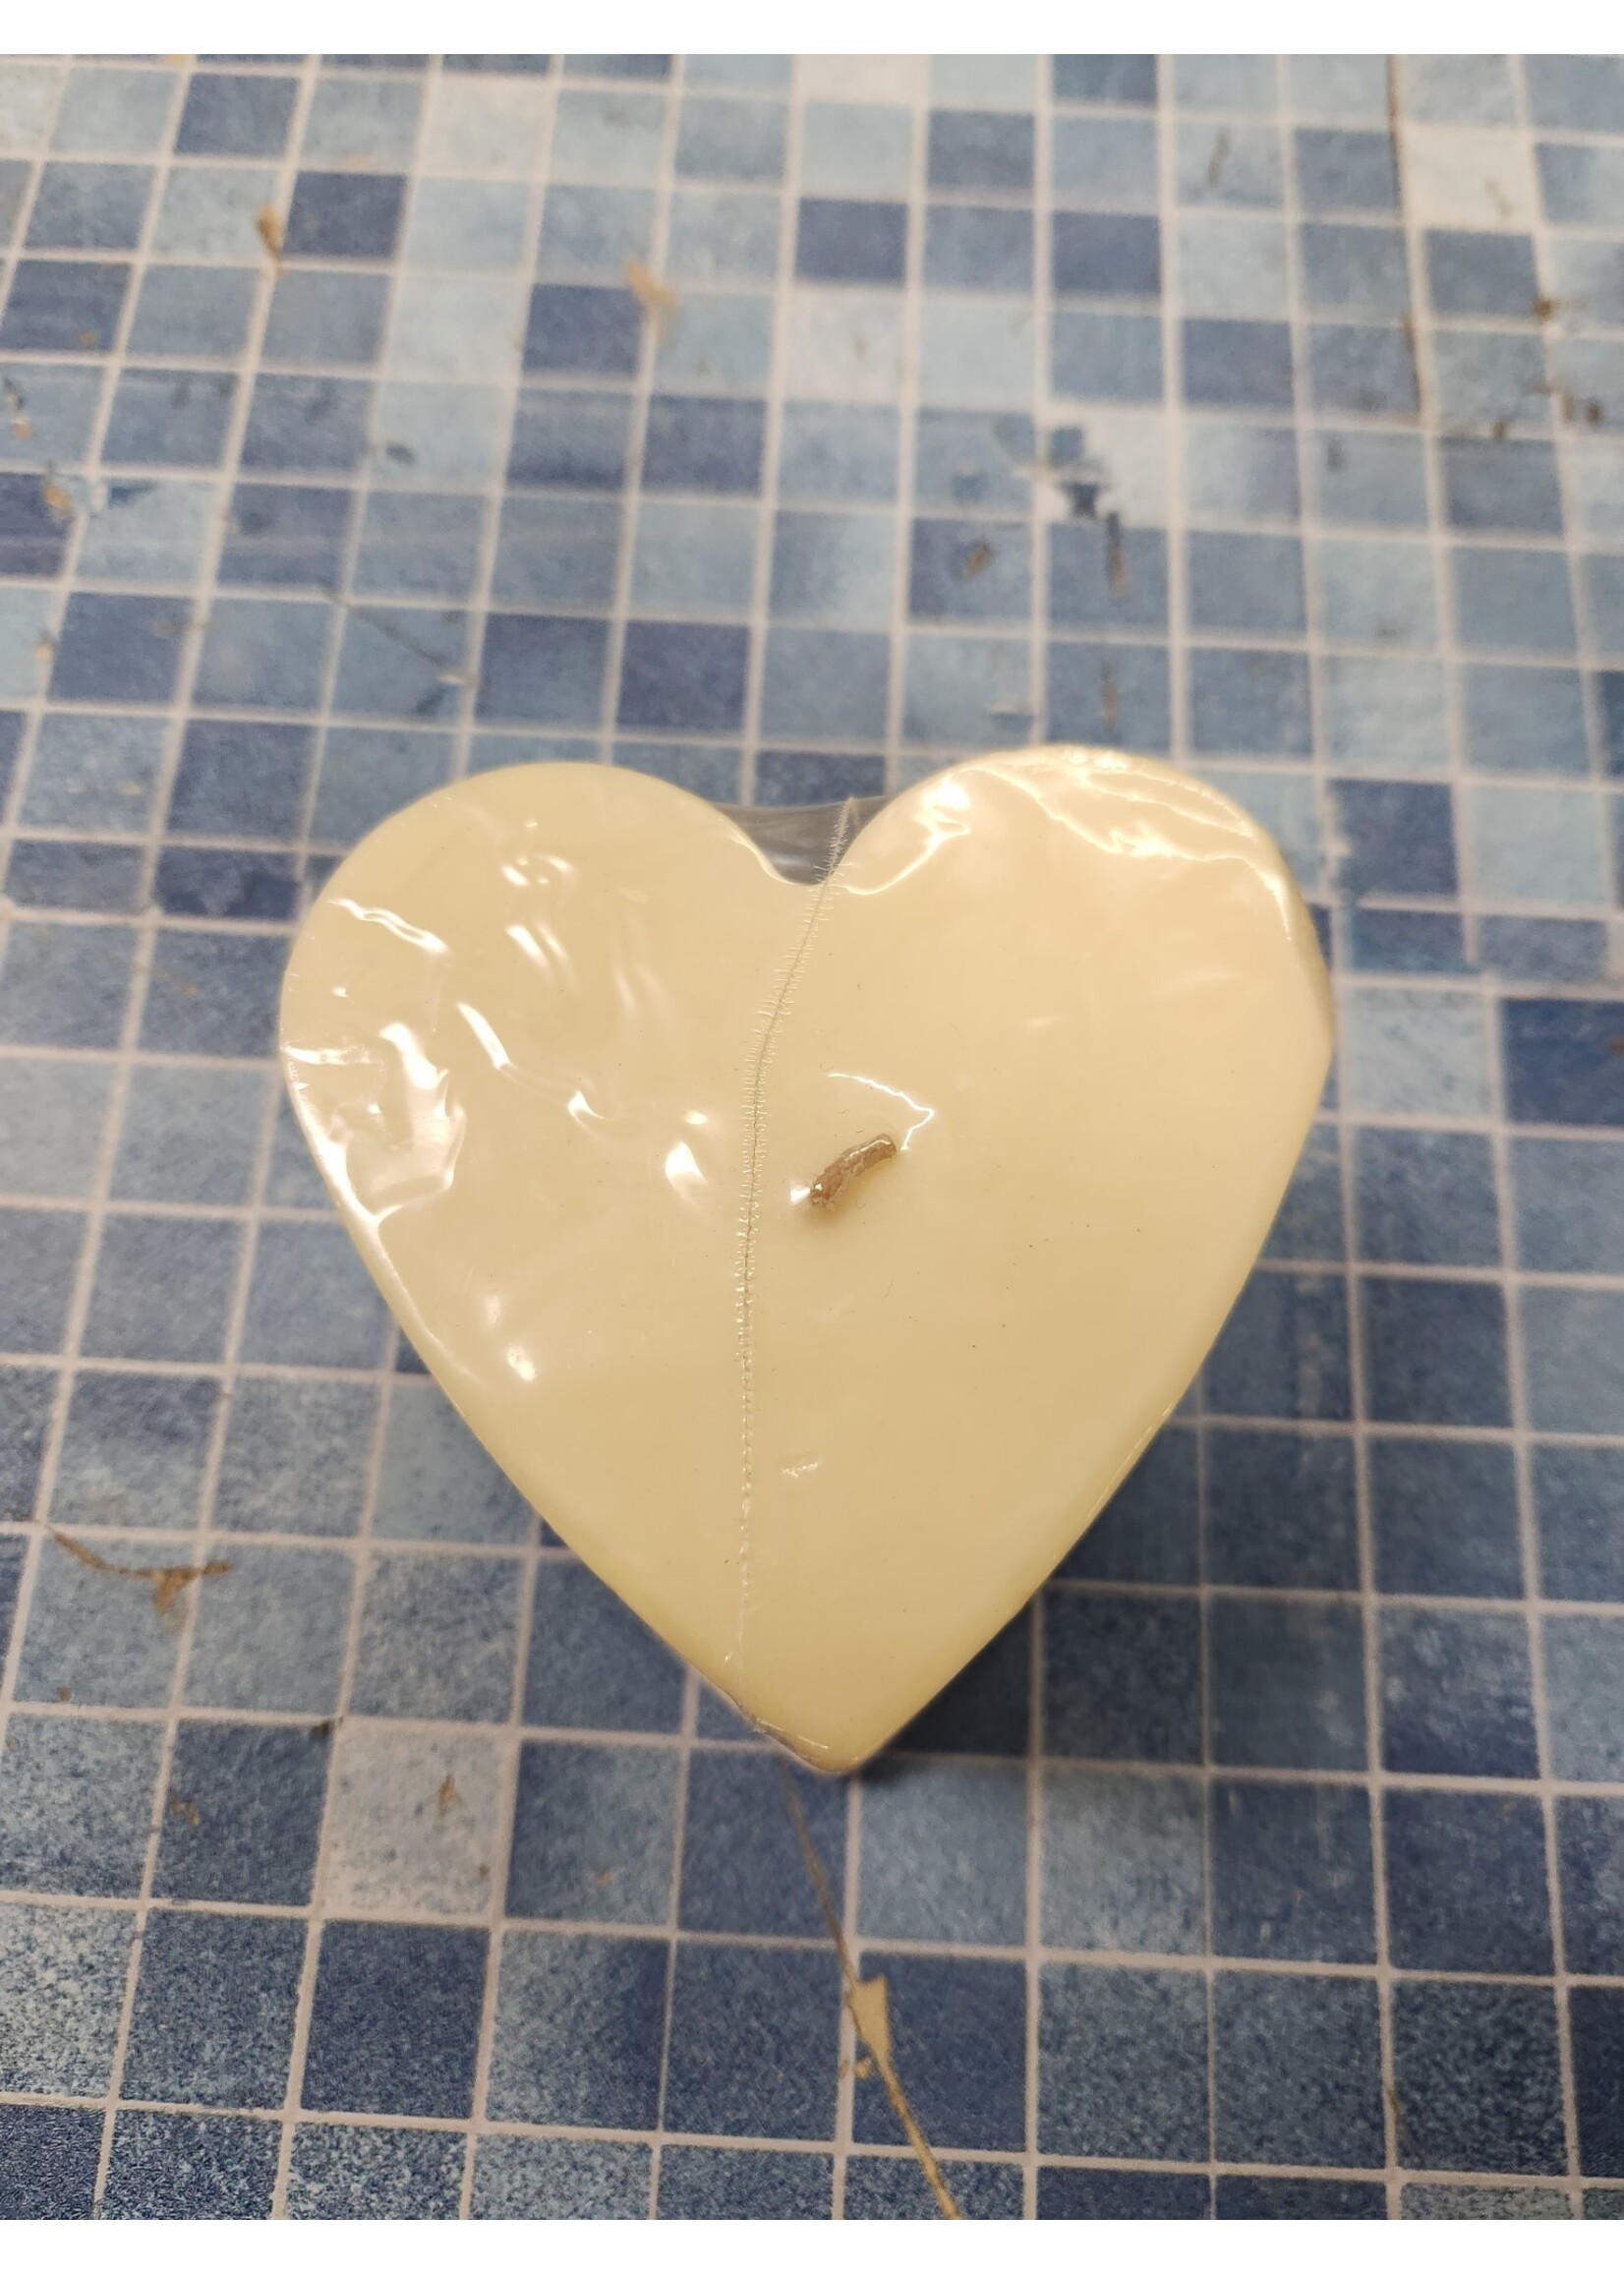 Large Heart Candle on Heart Plate